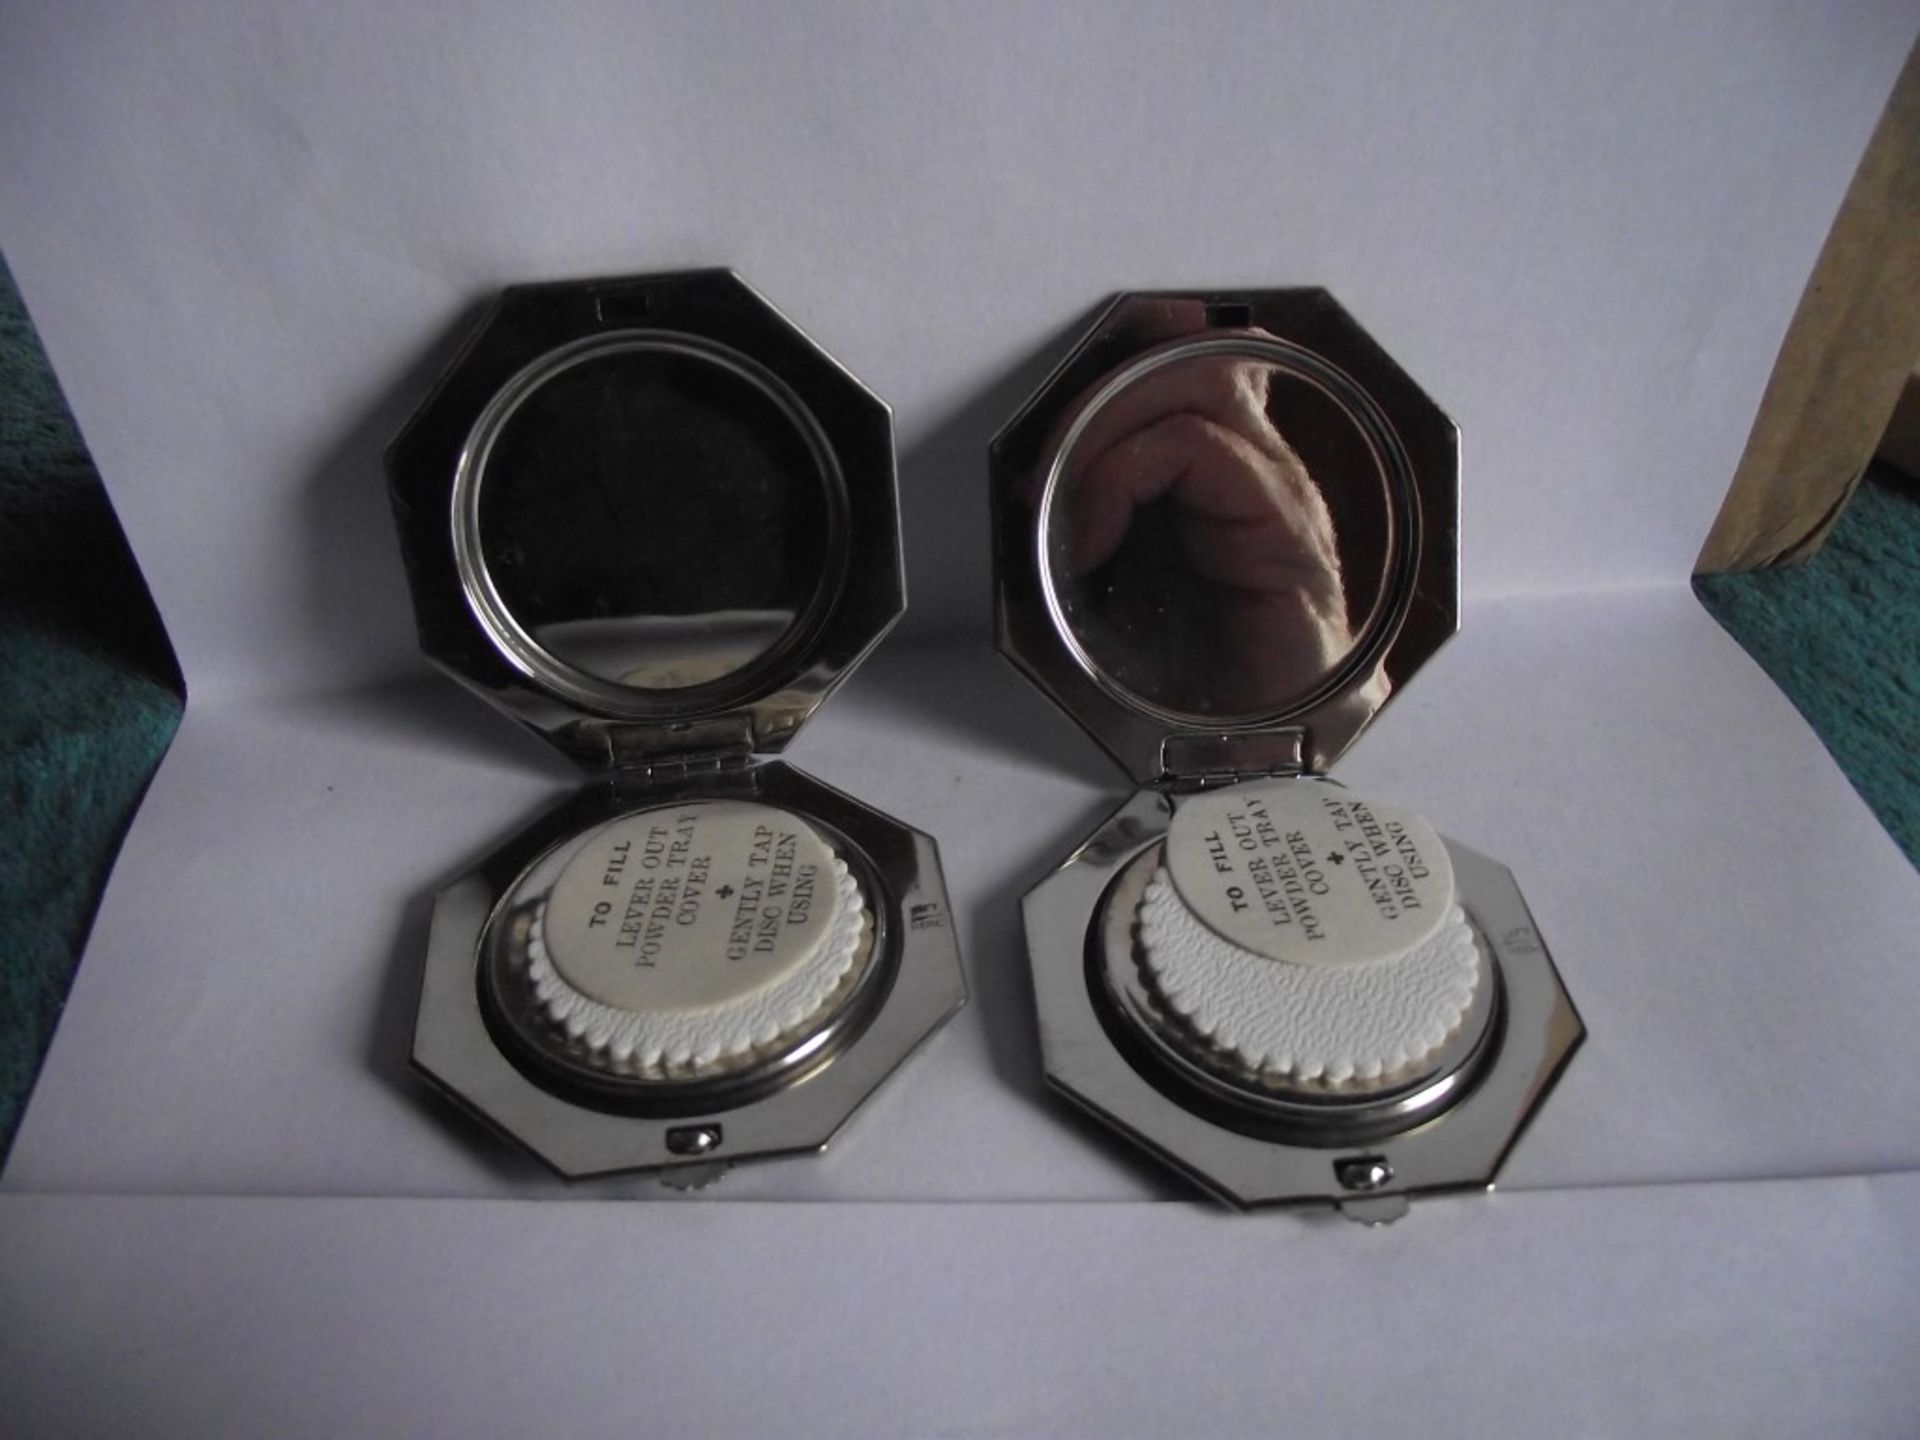 5 X 1930's Gwenda Powder Compacts & Cigarette Case - New Old Stock (unused)- original boxes. - Image 10 of 16